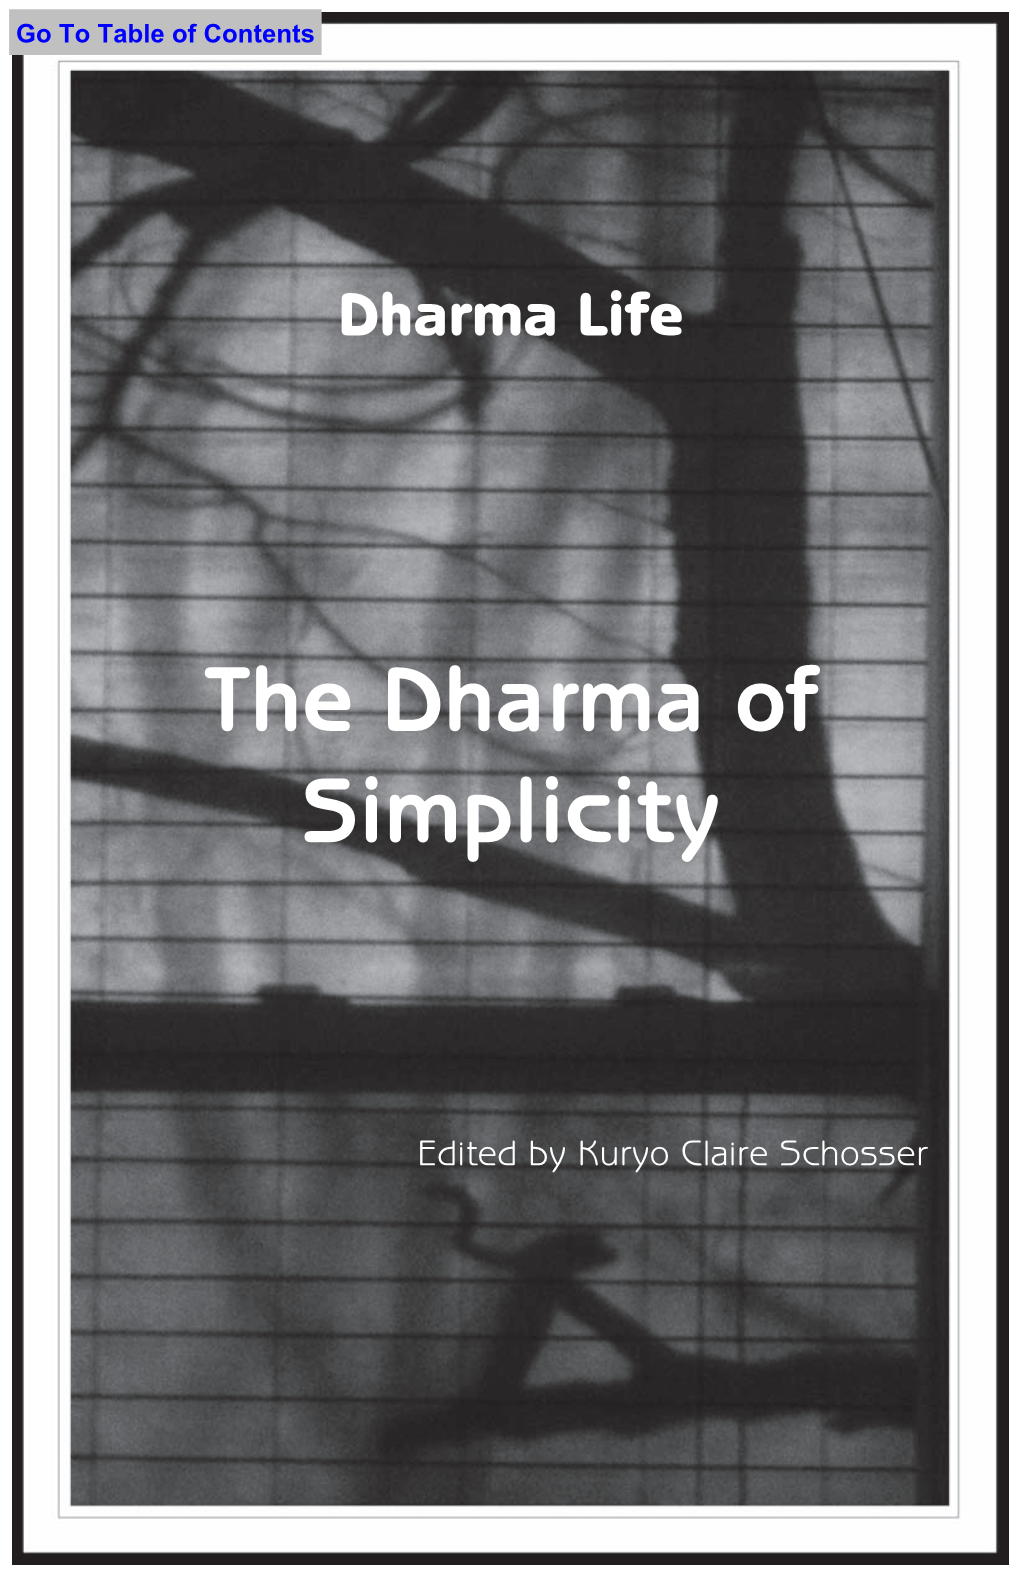 The Dharma of Simplicity